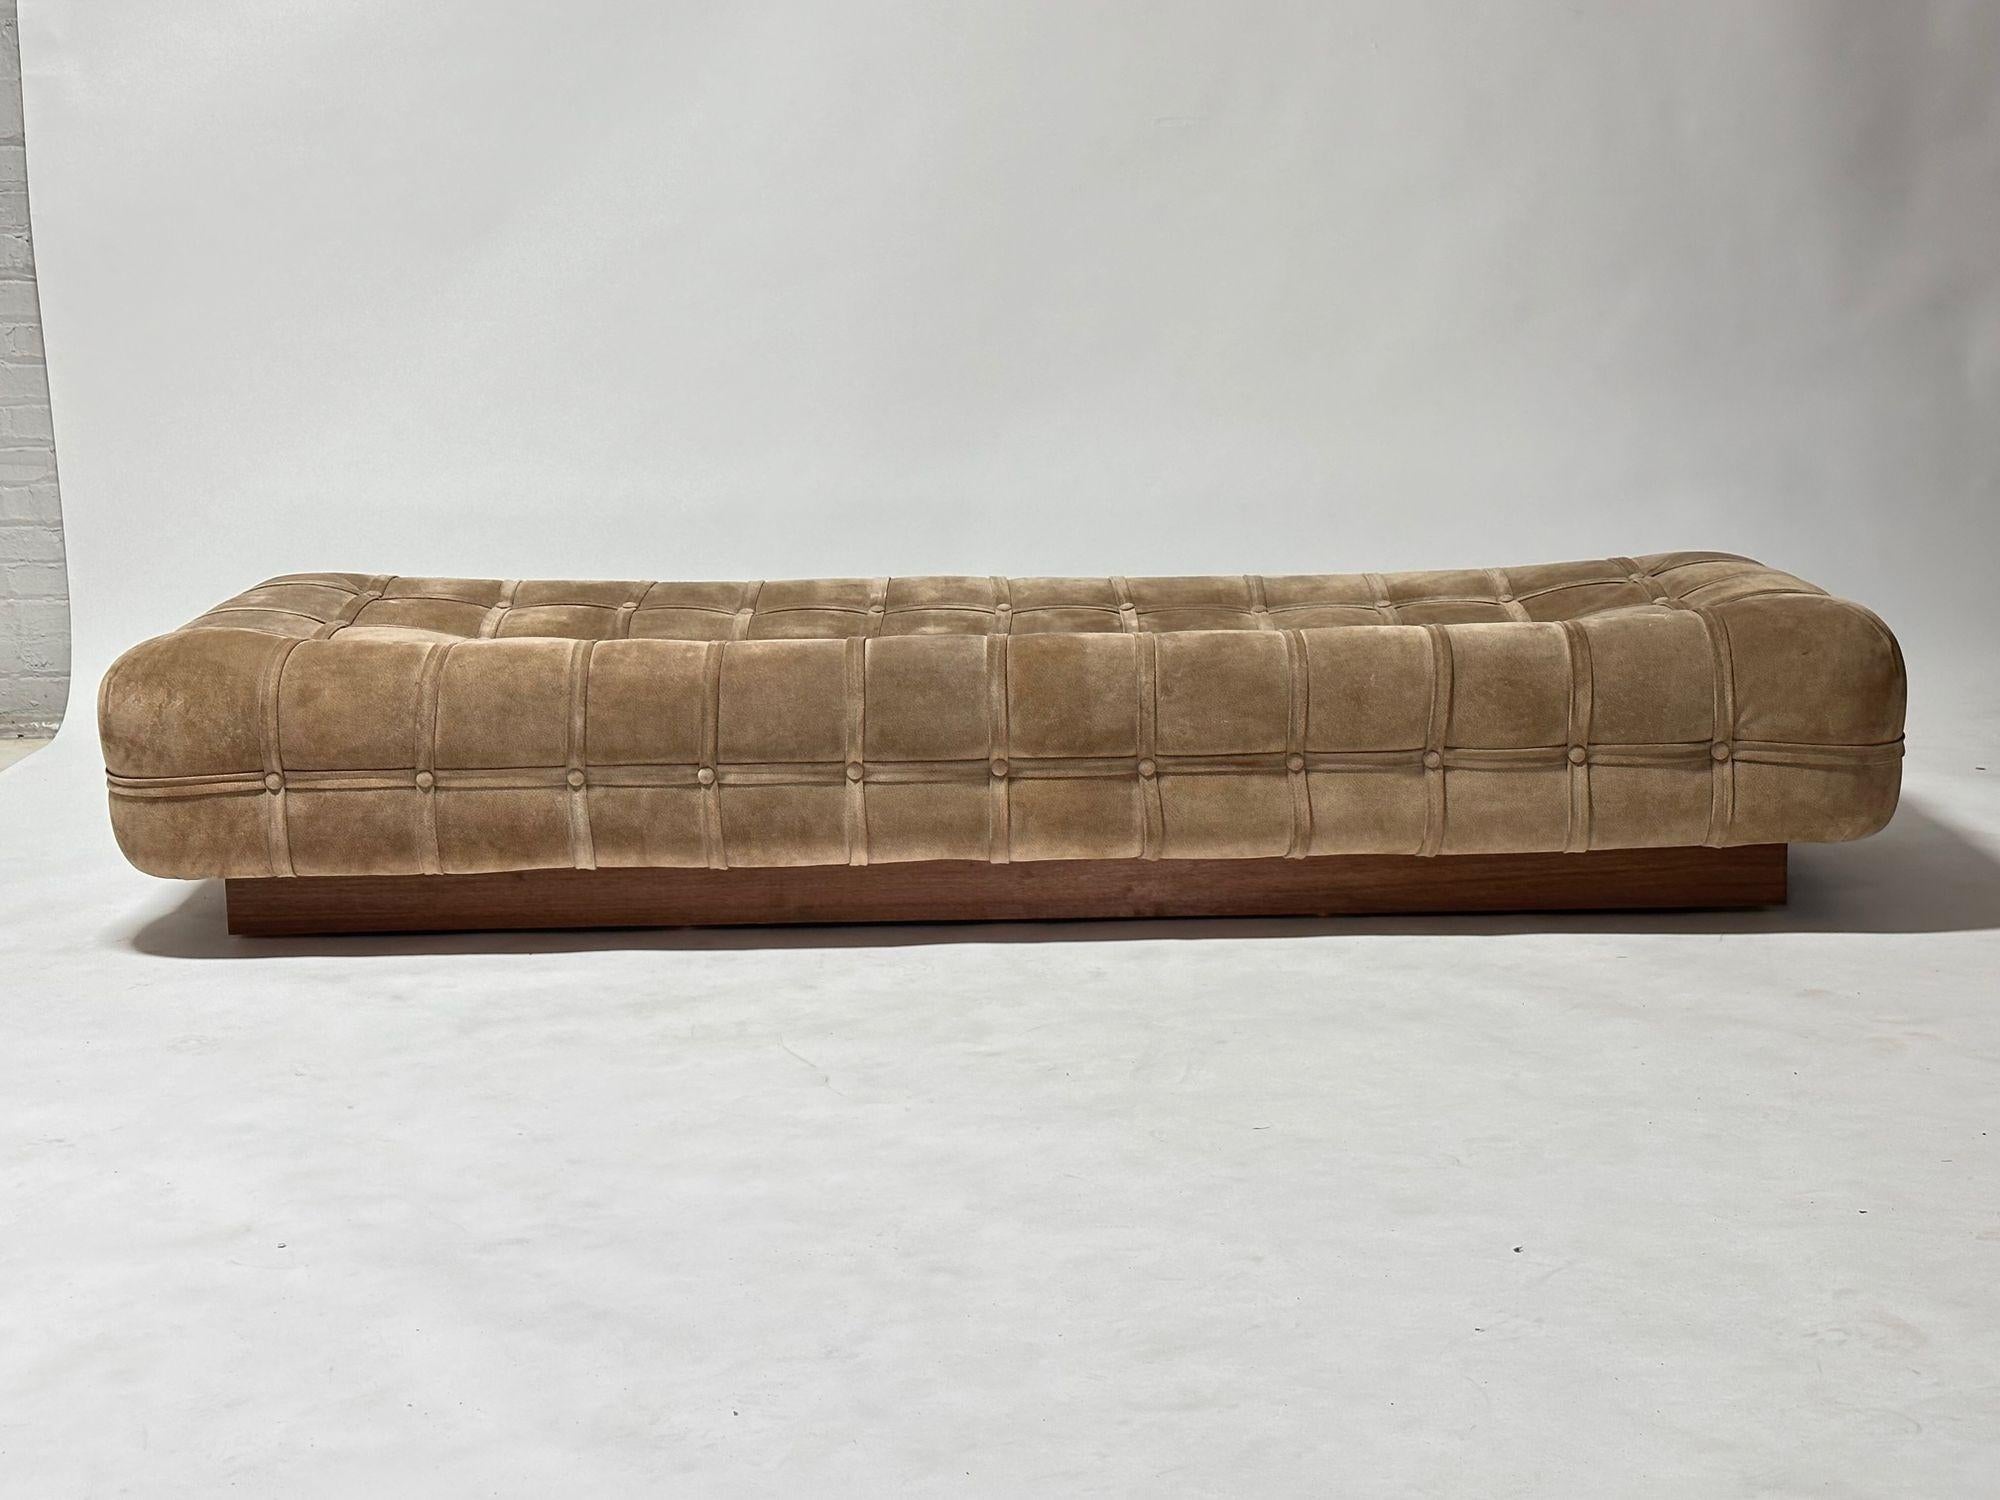 Suede Marshmallow Pouf Bench/ Daybed on Walnut Plinth Base, 1970. With suede strapping. Mfg by Helikon.